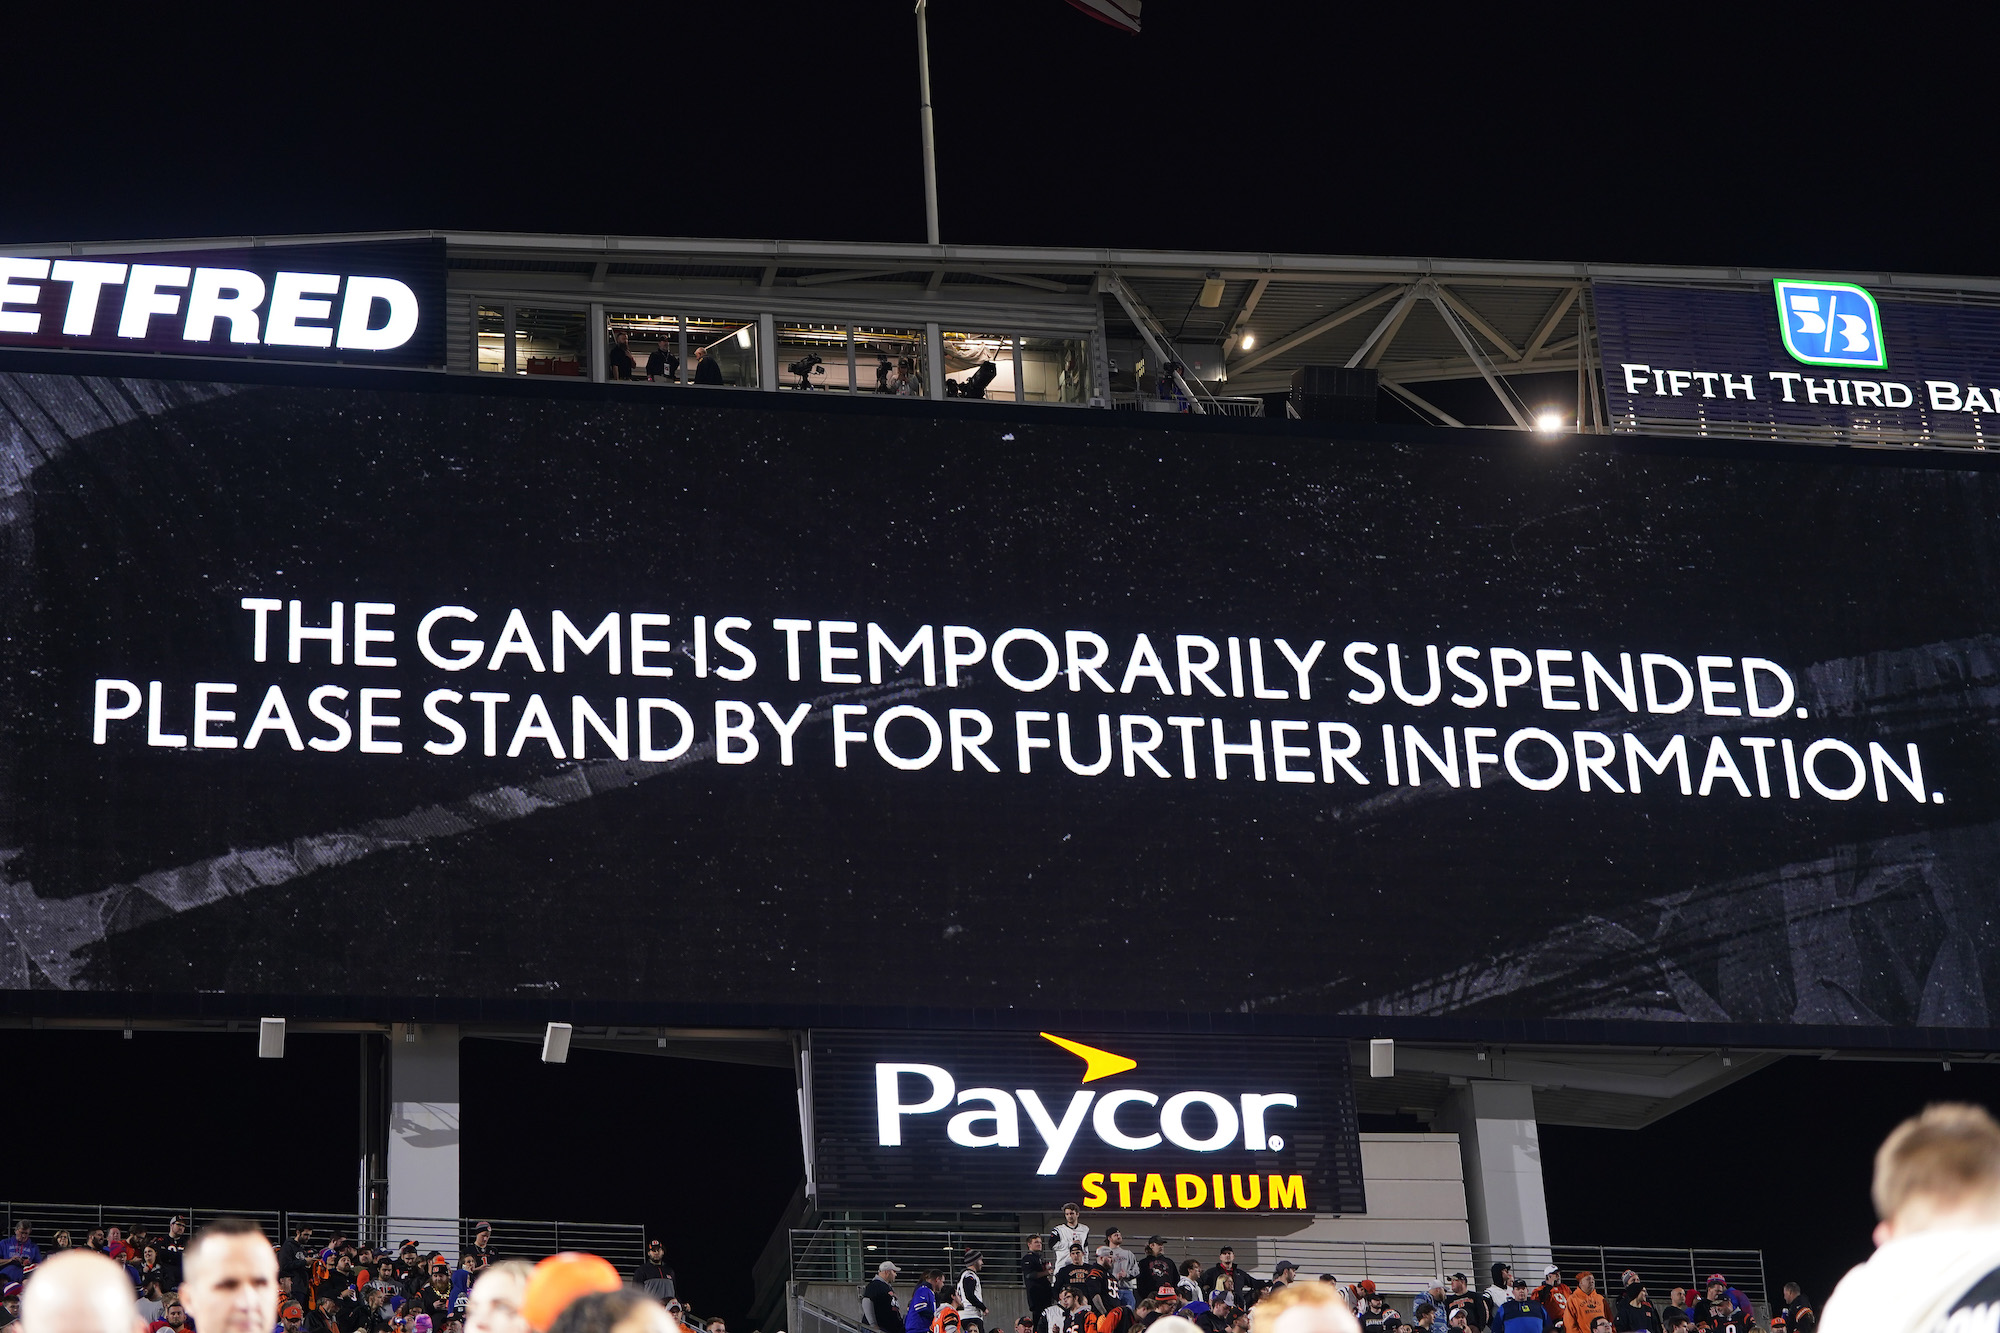 An announcement is displayed on the scoreboard after the game was temporarily suspended following the collapse of Damar Hamlin #3 of the Buffalo Bills after making a tackle against the Cincinnati Bengals at Paycor Stadium on January 02, 2023 in Cincinnati, Ohio. (Photo by Dylan Buell/Getty Images)